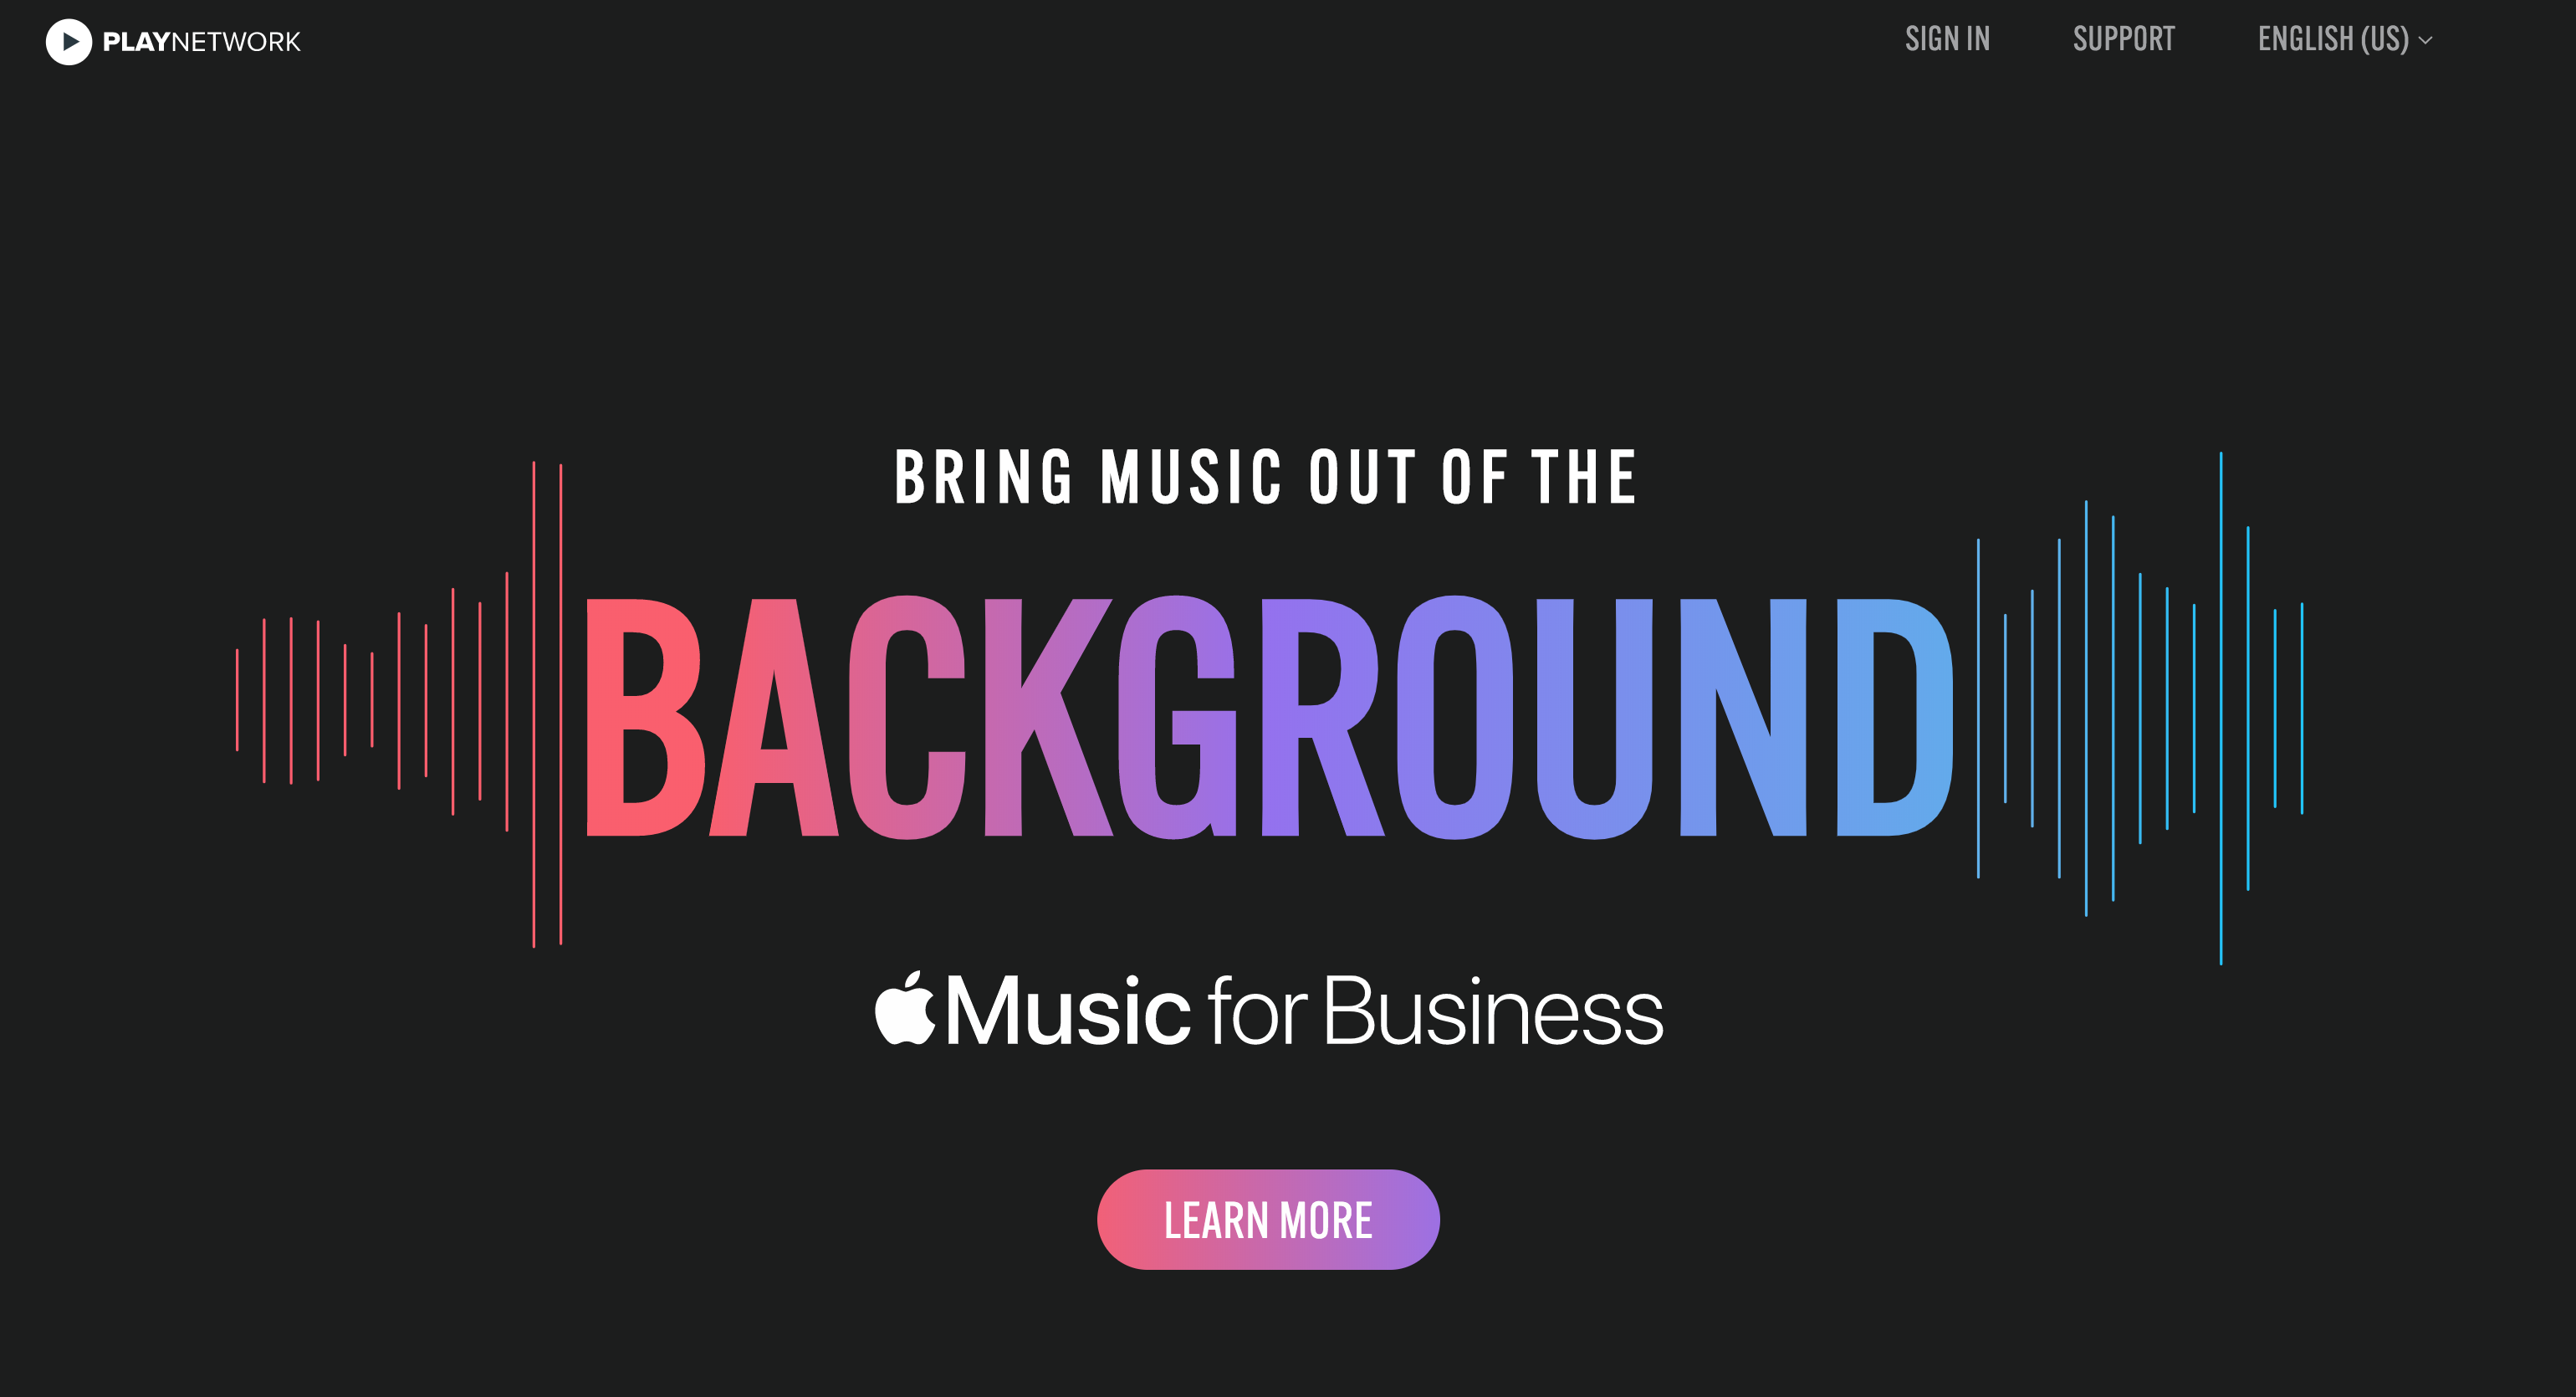 Going into the business market for Apple's music program